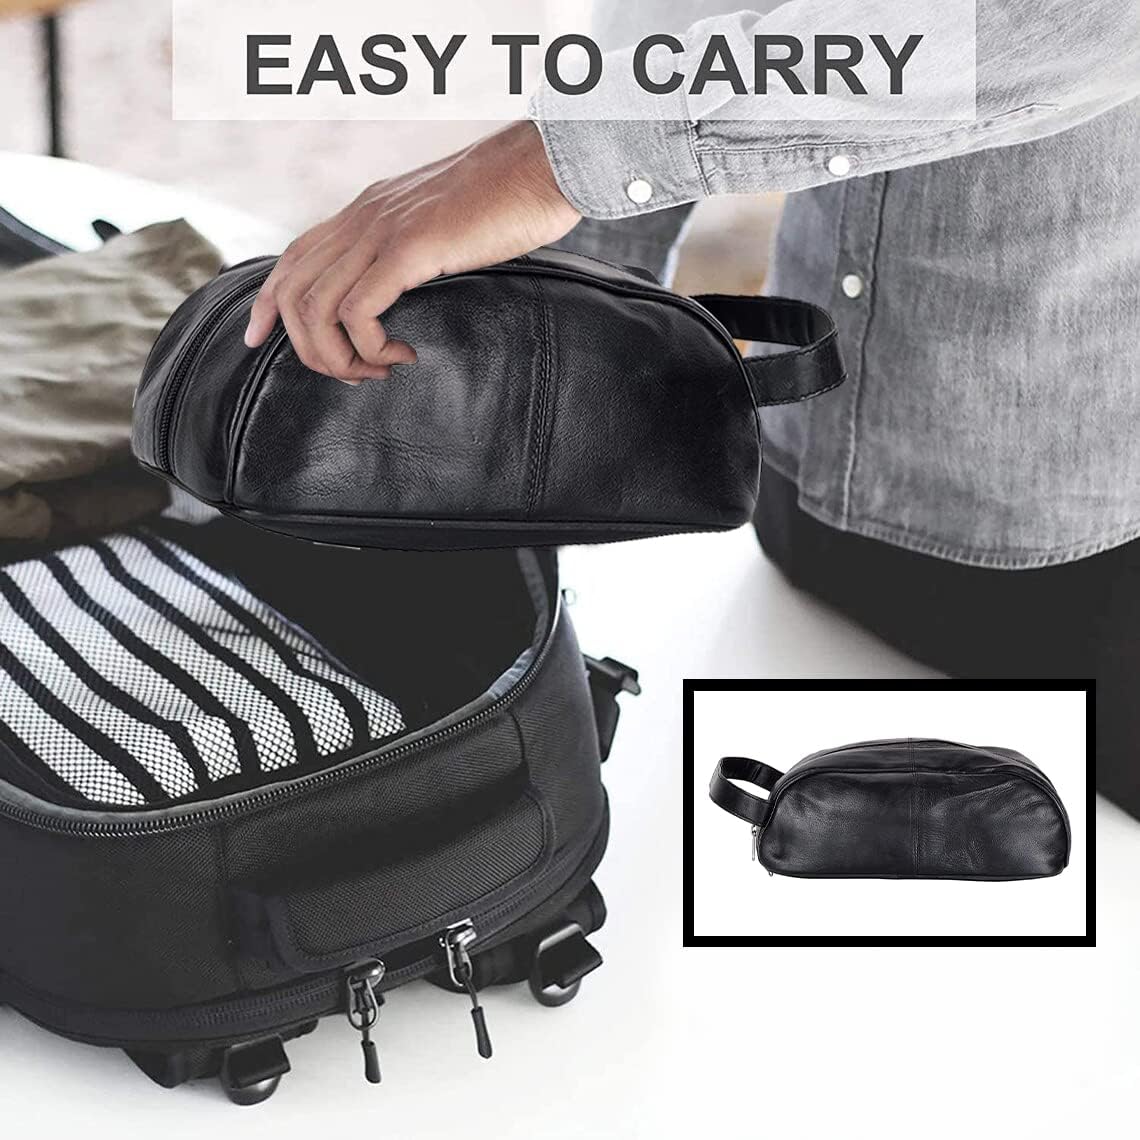 Unisex Toiletry Travel Bag Bathroom Organizer/Shoe Bag Portable Cosmetic Case and Traveling Kit Leather Shaving Bag in Black